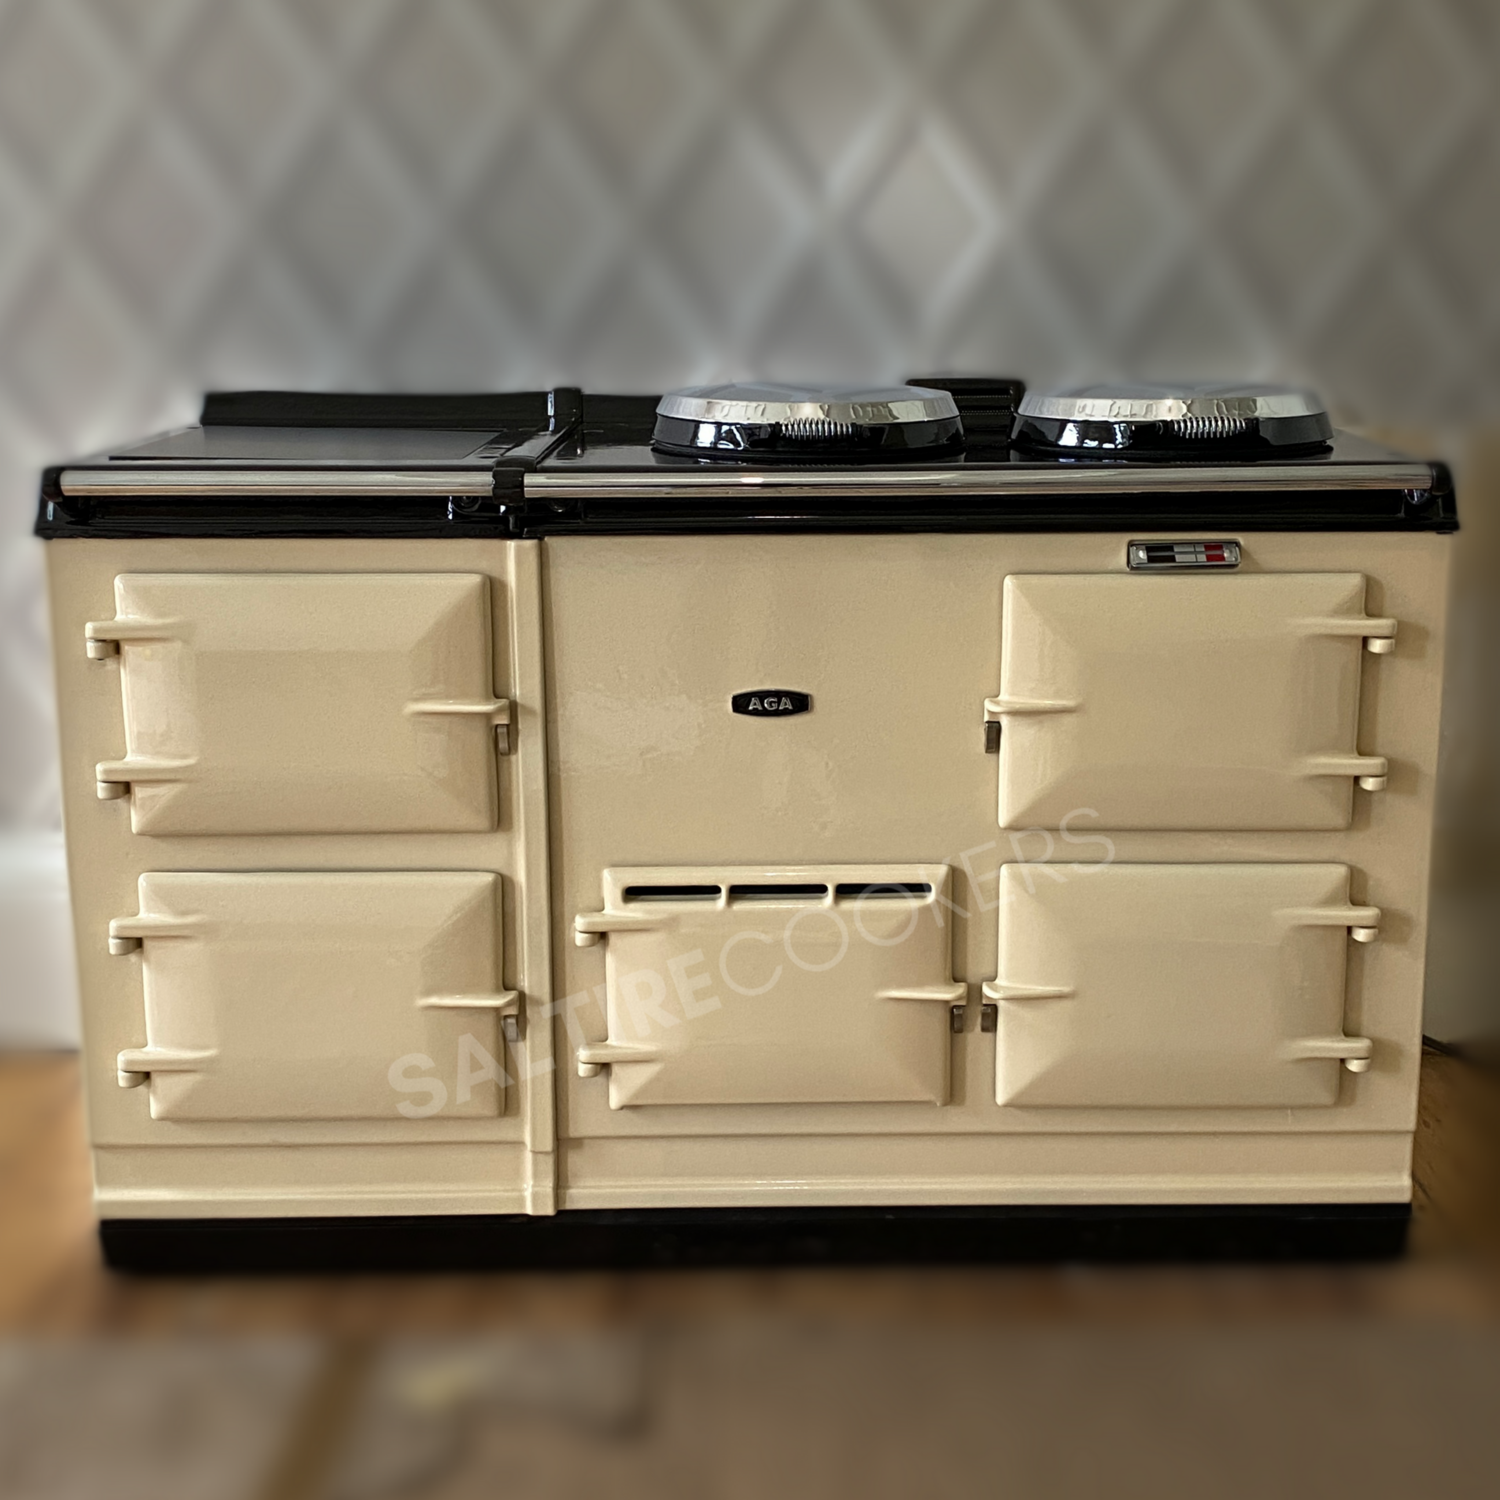 Reconditioned 4 Oven ElectricKit Aga Cooker (Cream)